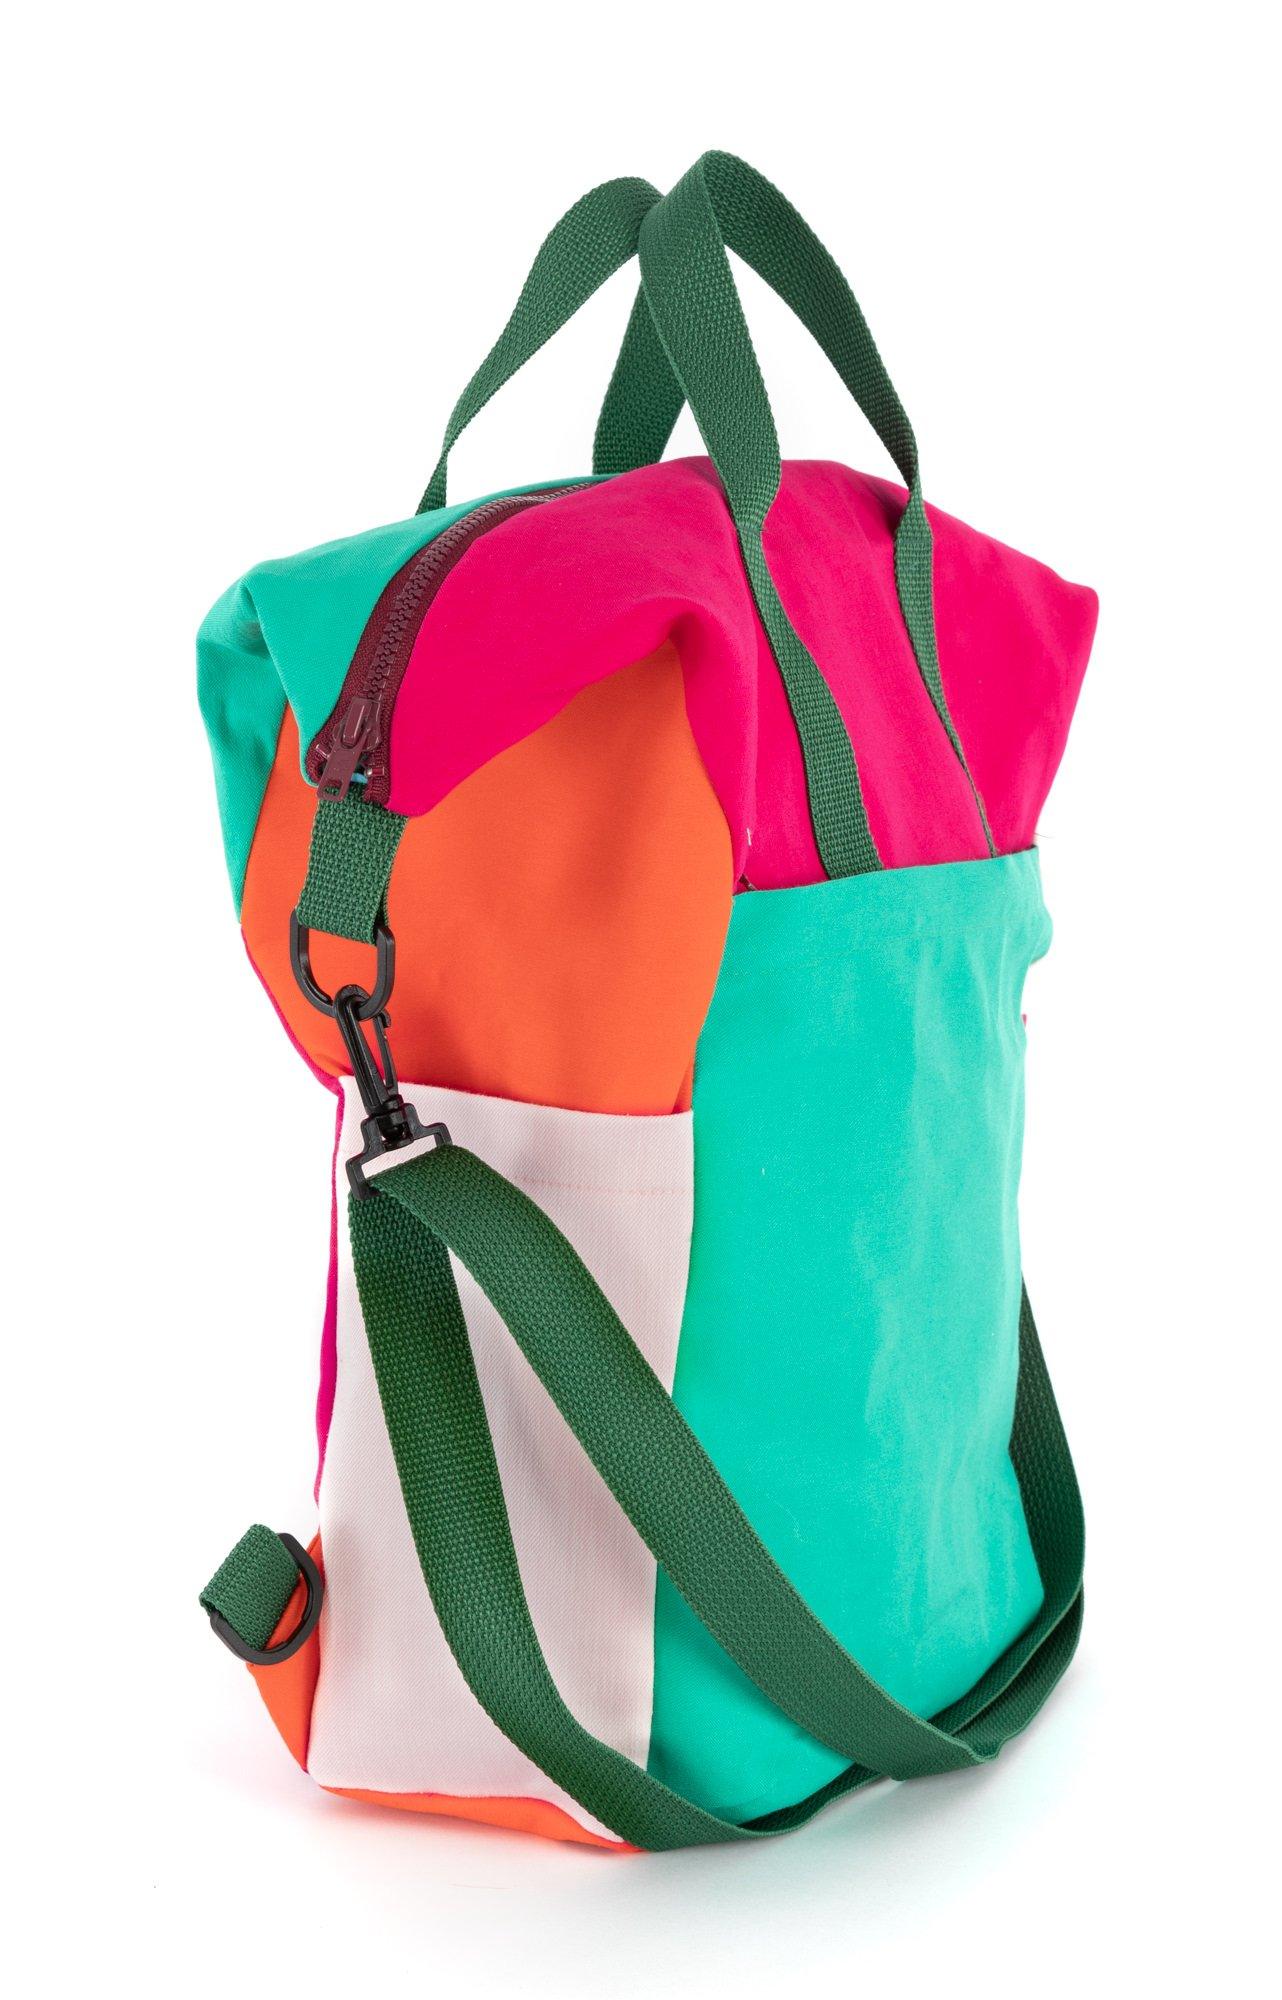 Funky convertible vega bag in a mix of colorful twill